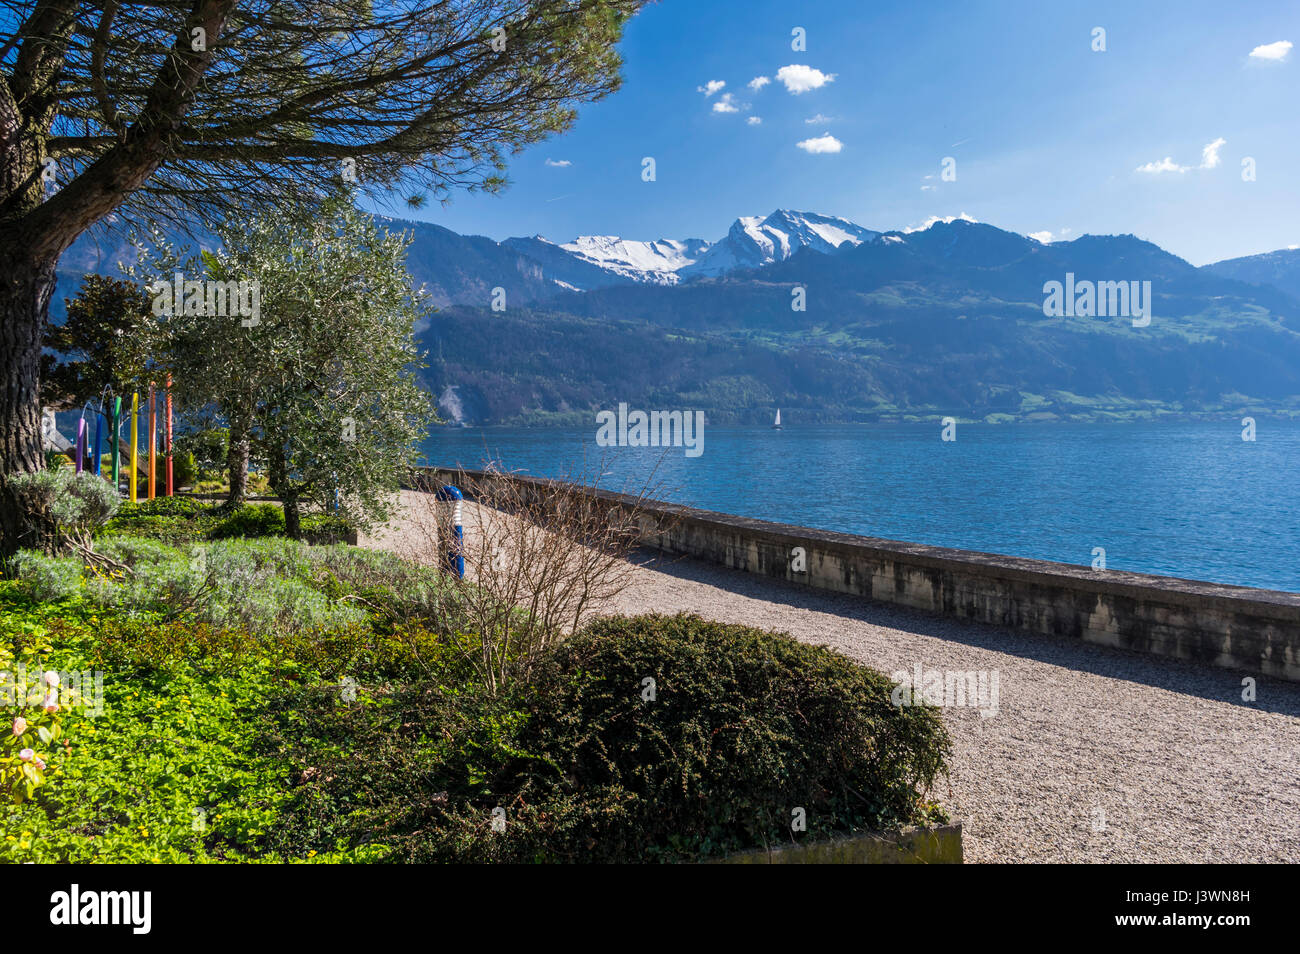 View of Lake Lucerne (Vierwaldstättersee) and the Swiss Alps from the waterfront park of Gersau, Switzerland, on a sunny spring day. Stock Photo